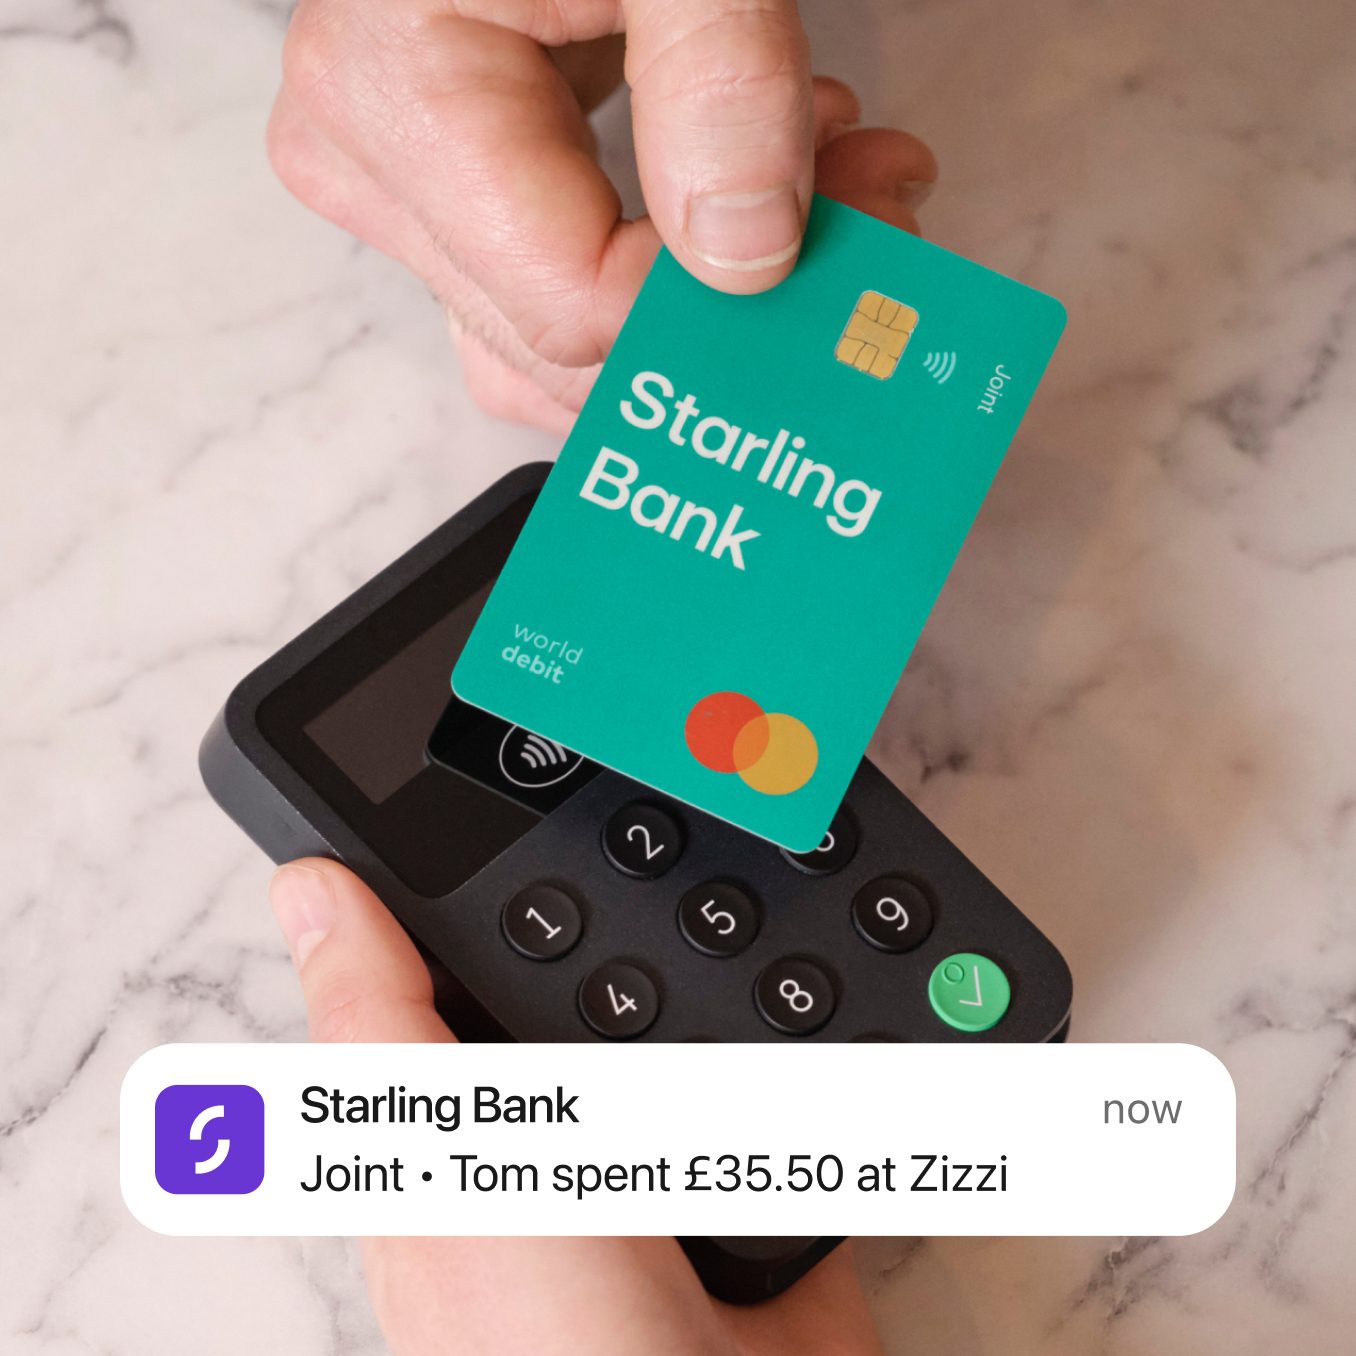 A green coloured starling bank debit car being used to make a contactless purchase for £35.50 at Zizzi